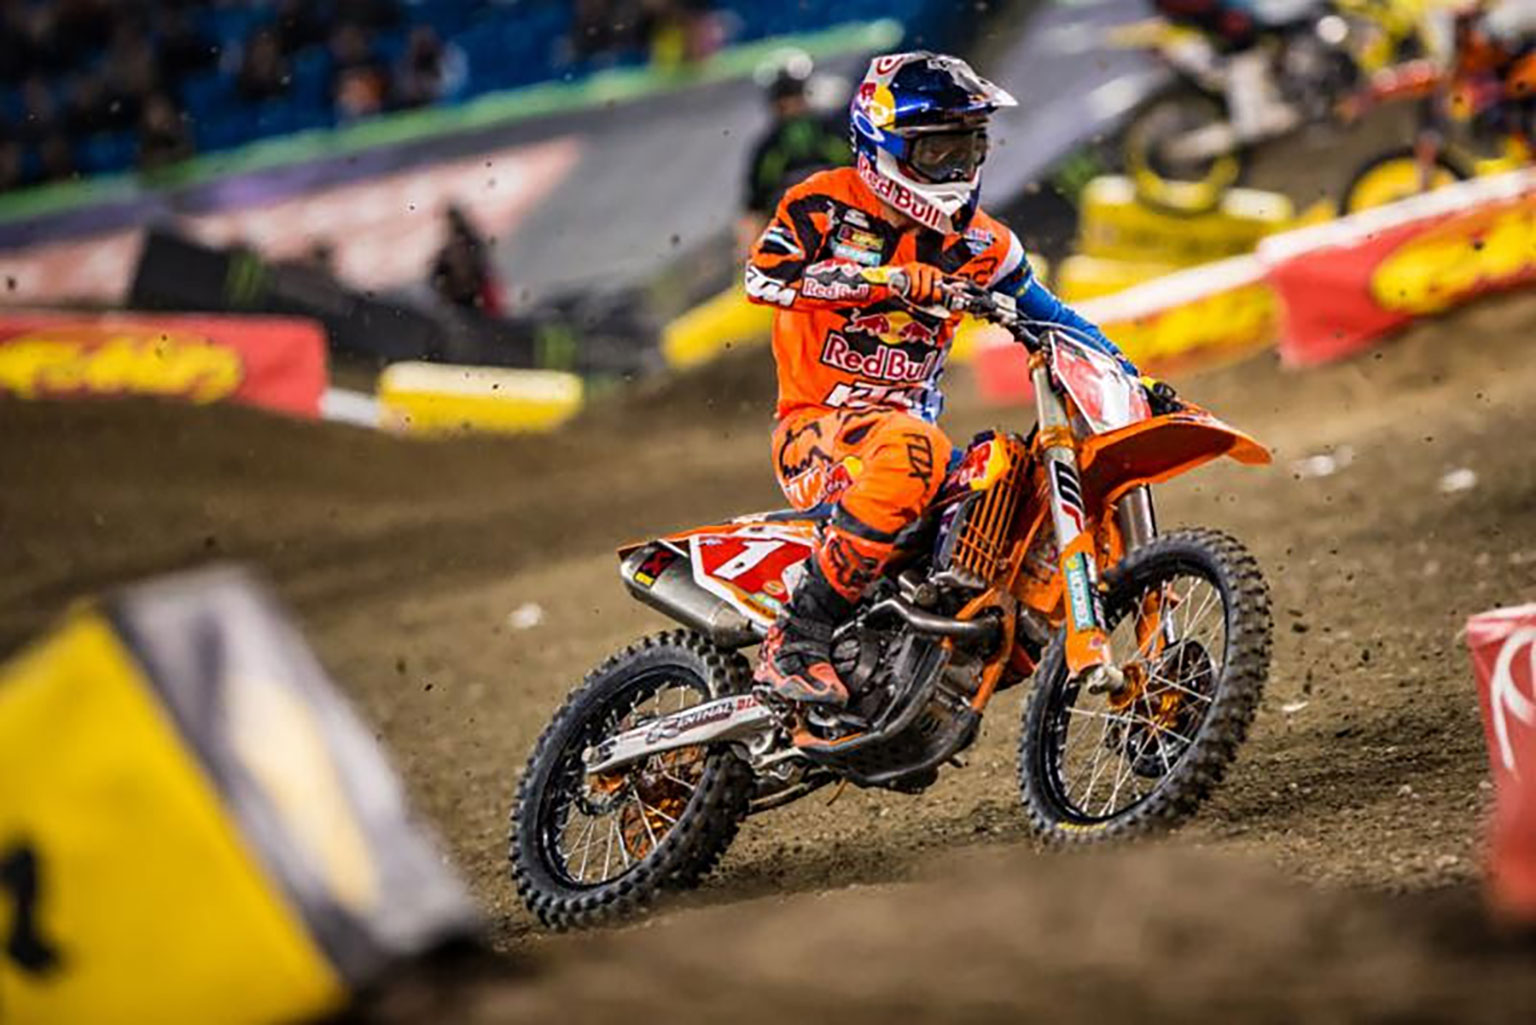 Dungey keeps the red plate